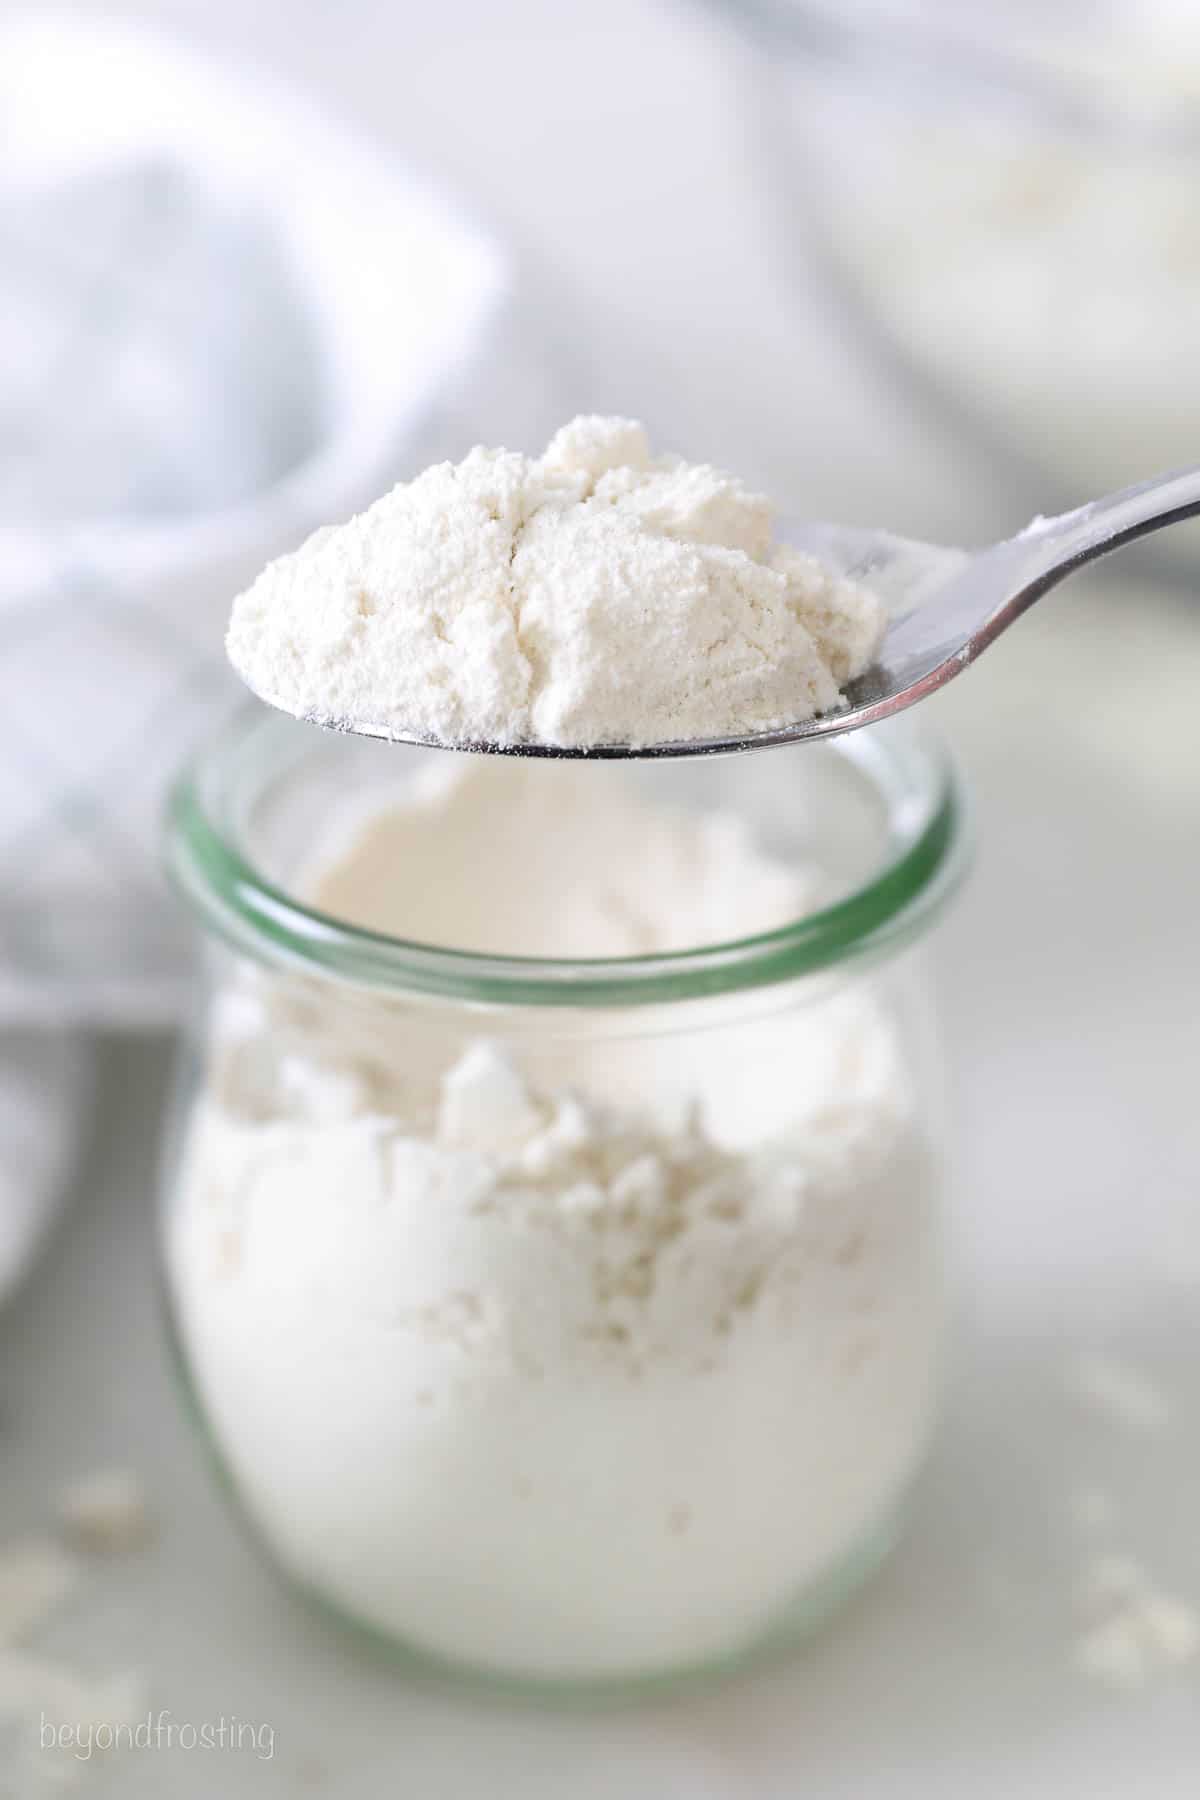 A spoonful of flour over a small jar of flour